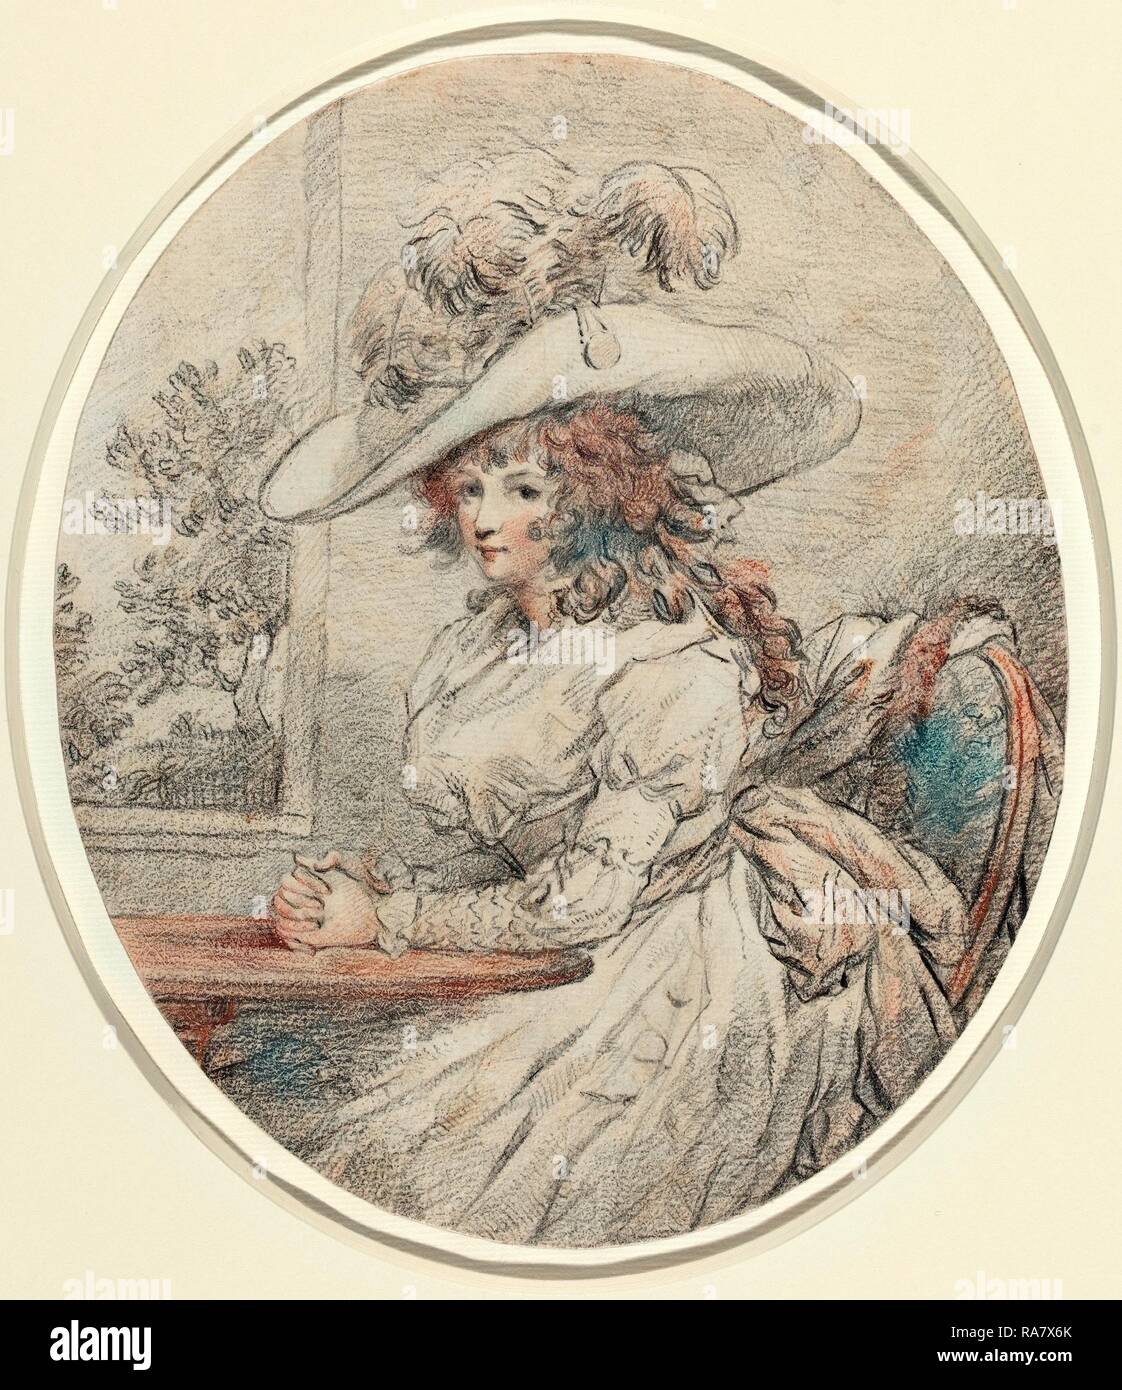 George Morland (British, 1763 - 1804), Anne Ward Morland, c. 1786, graphite with black and red chalk on laid paper reimagined Stock Photo